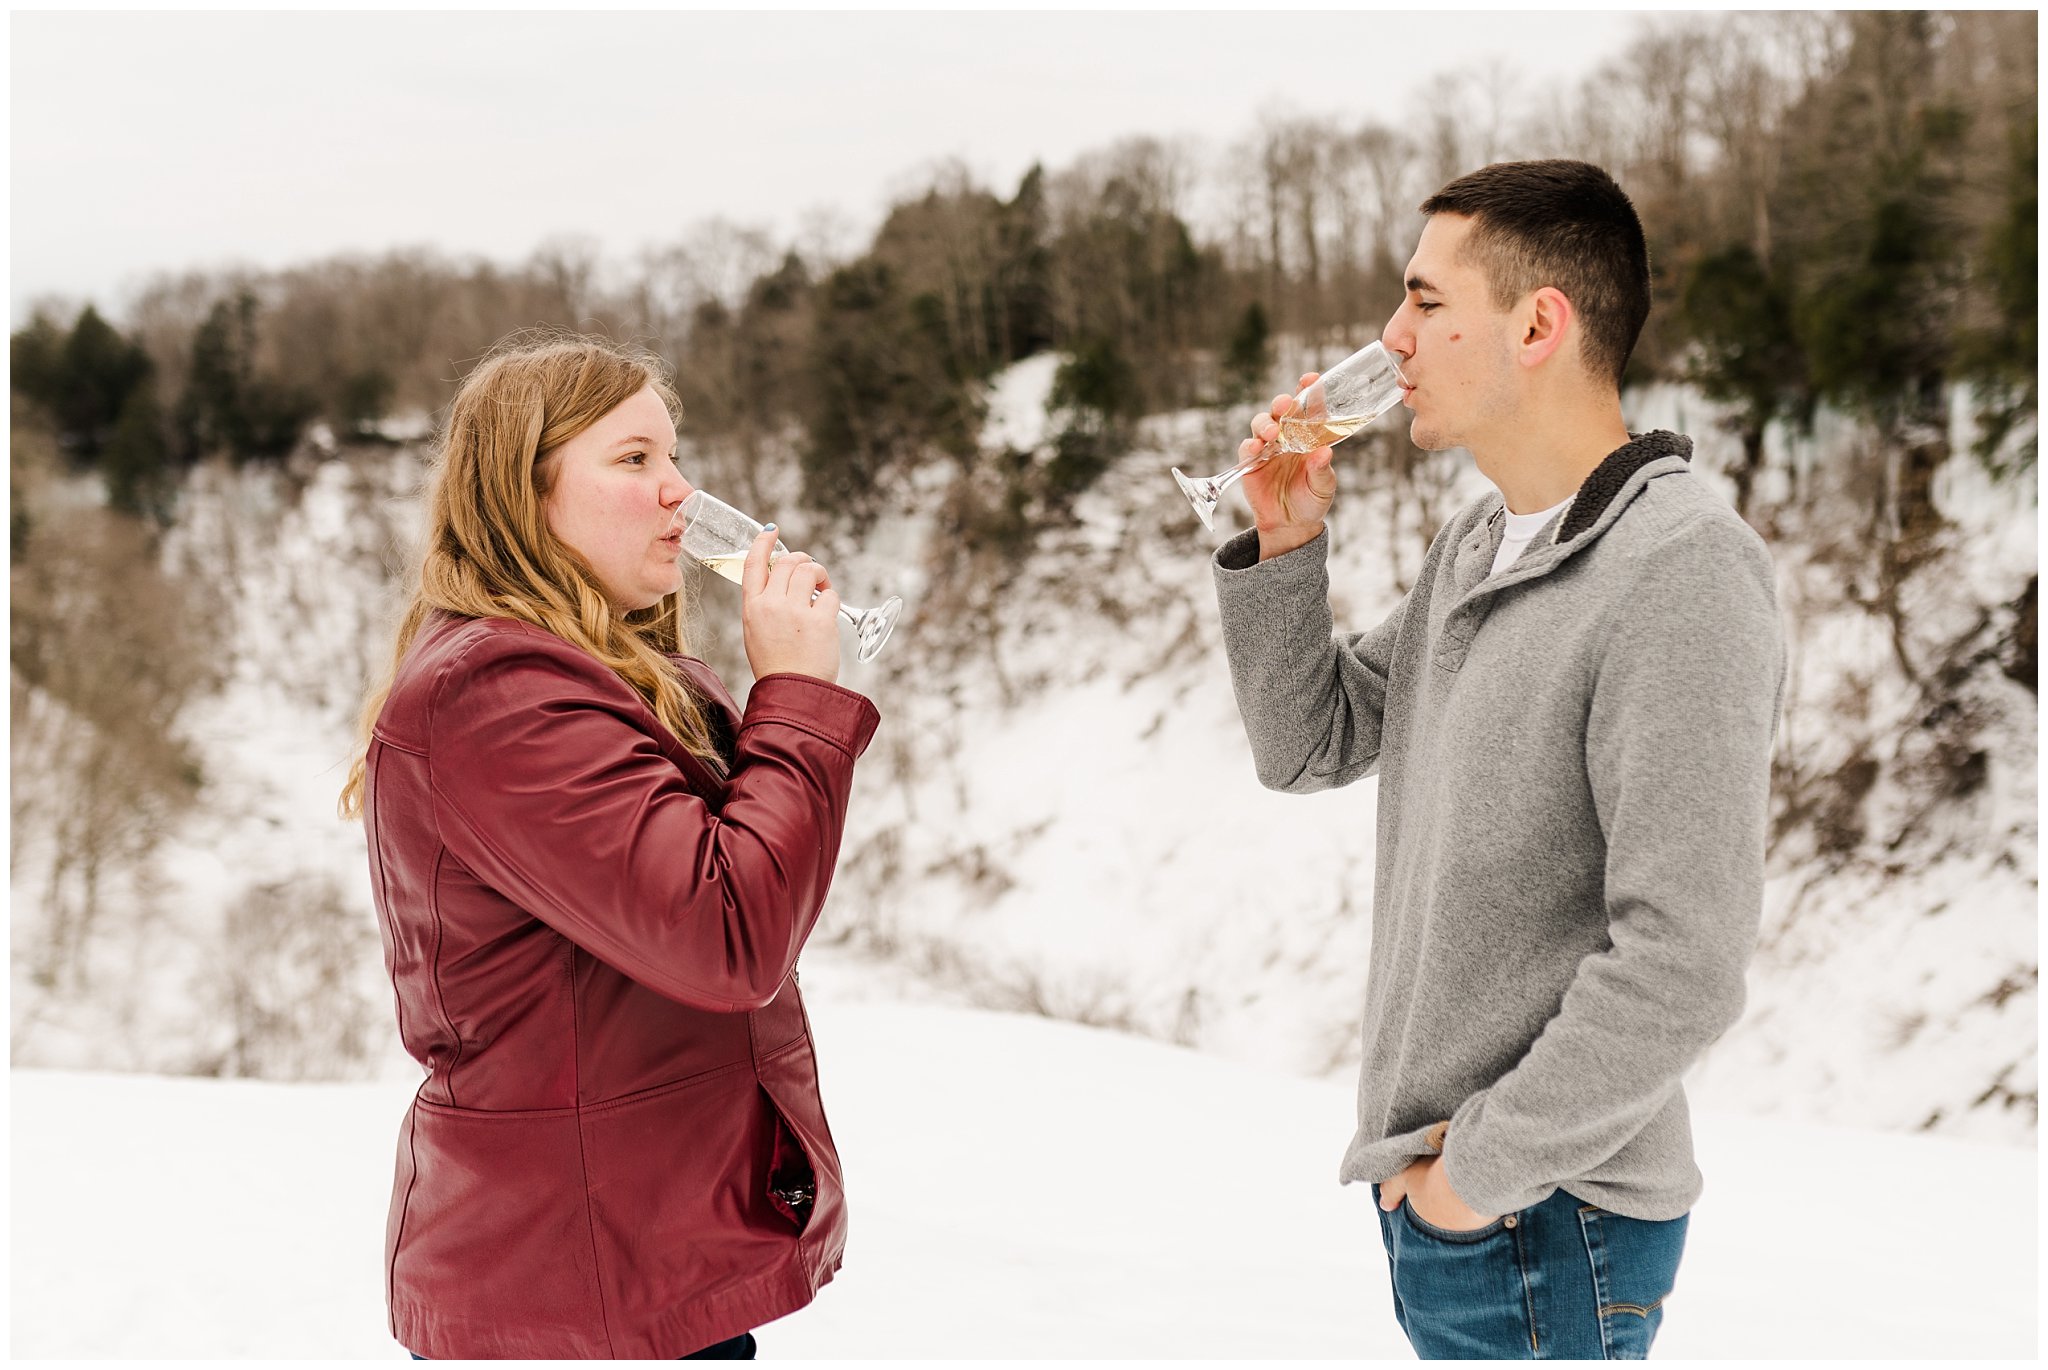 Engagement Session Ideas,Joanna Young Photography,Salmon River Ralls,Waterfall Engagement Photos,Wedding Photographer,Winter Engagement Session,